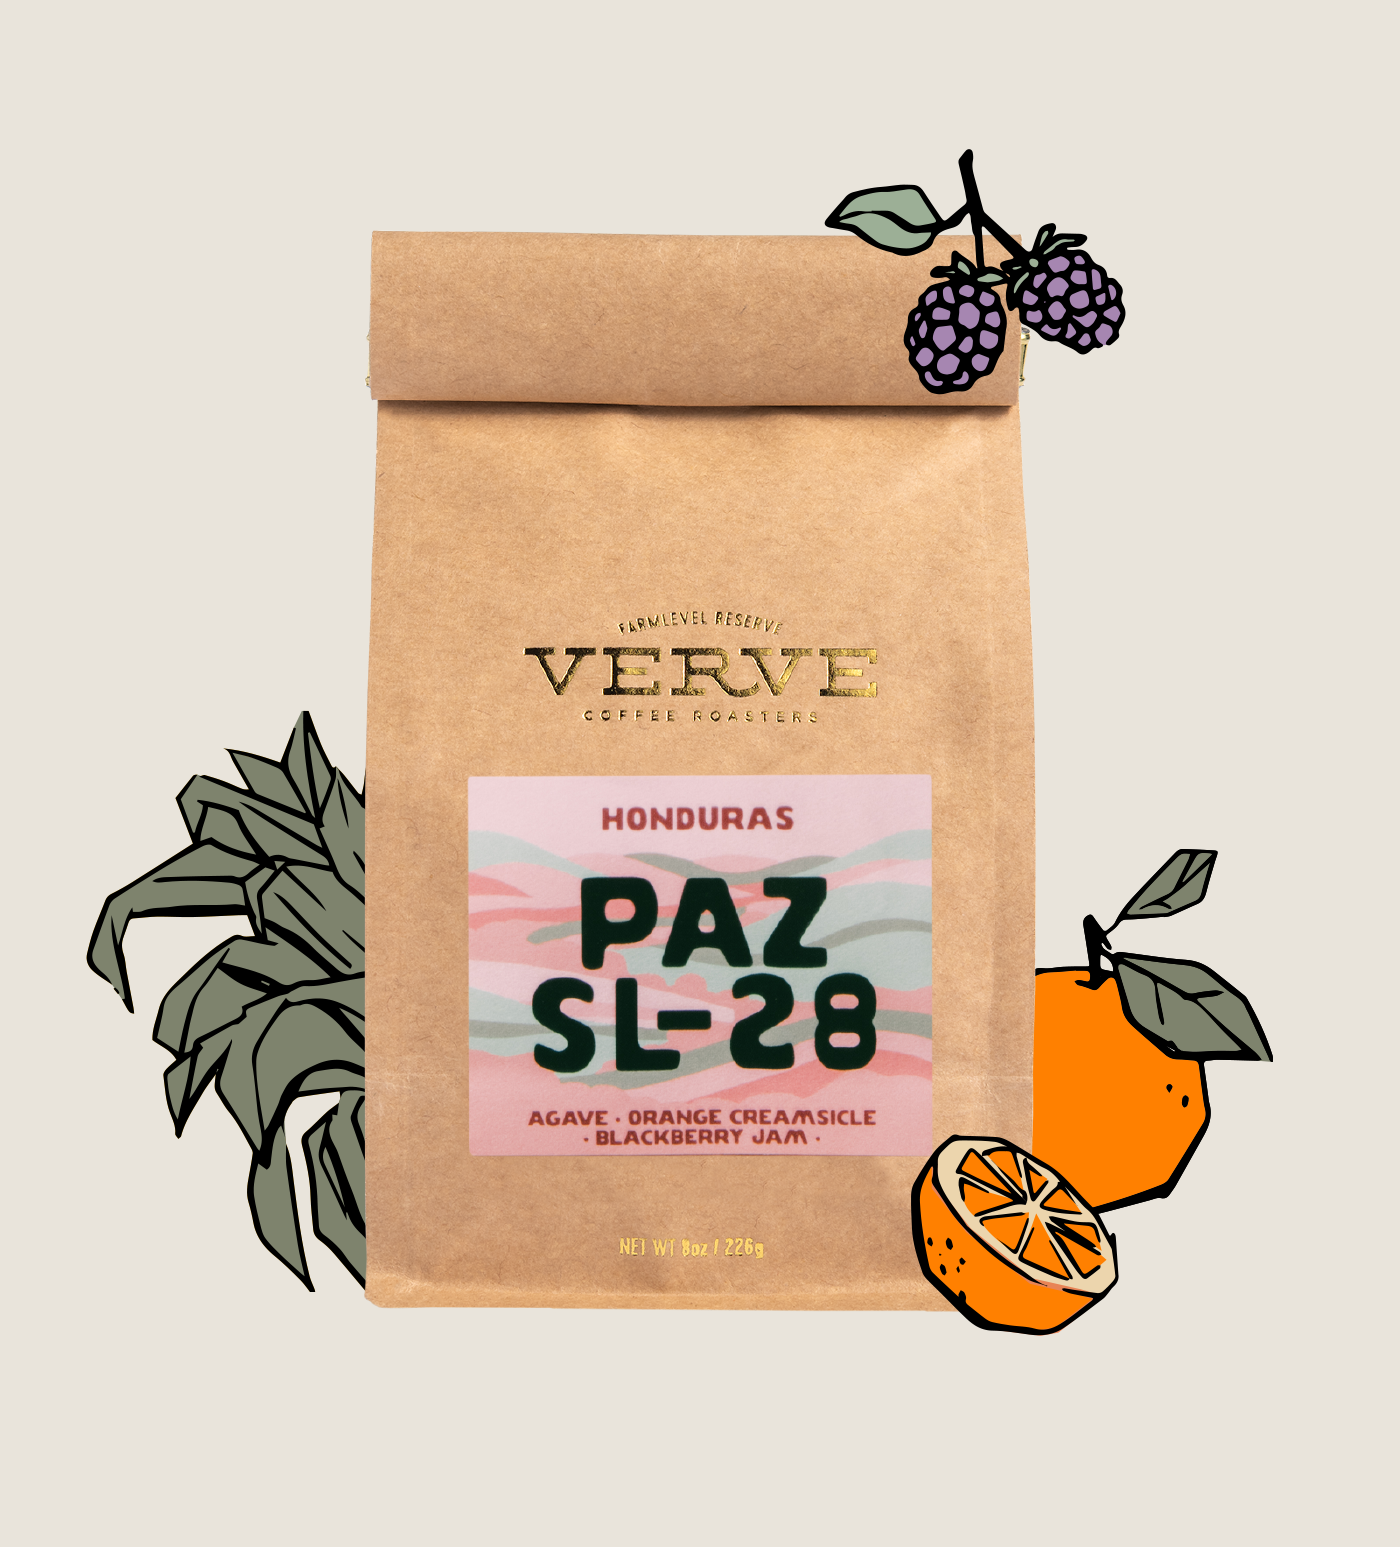 Paz SL-28 8oz Whole Bean with tasting notes